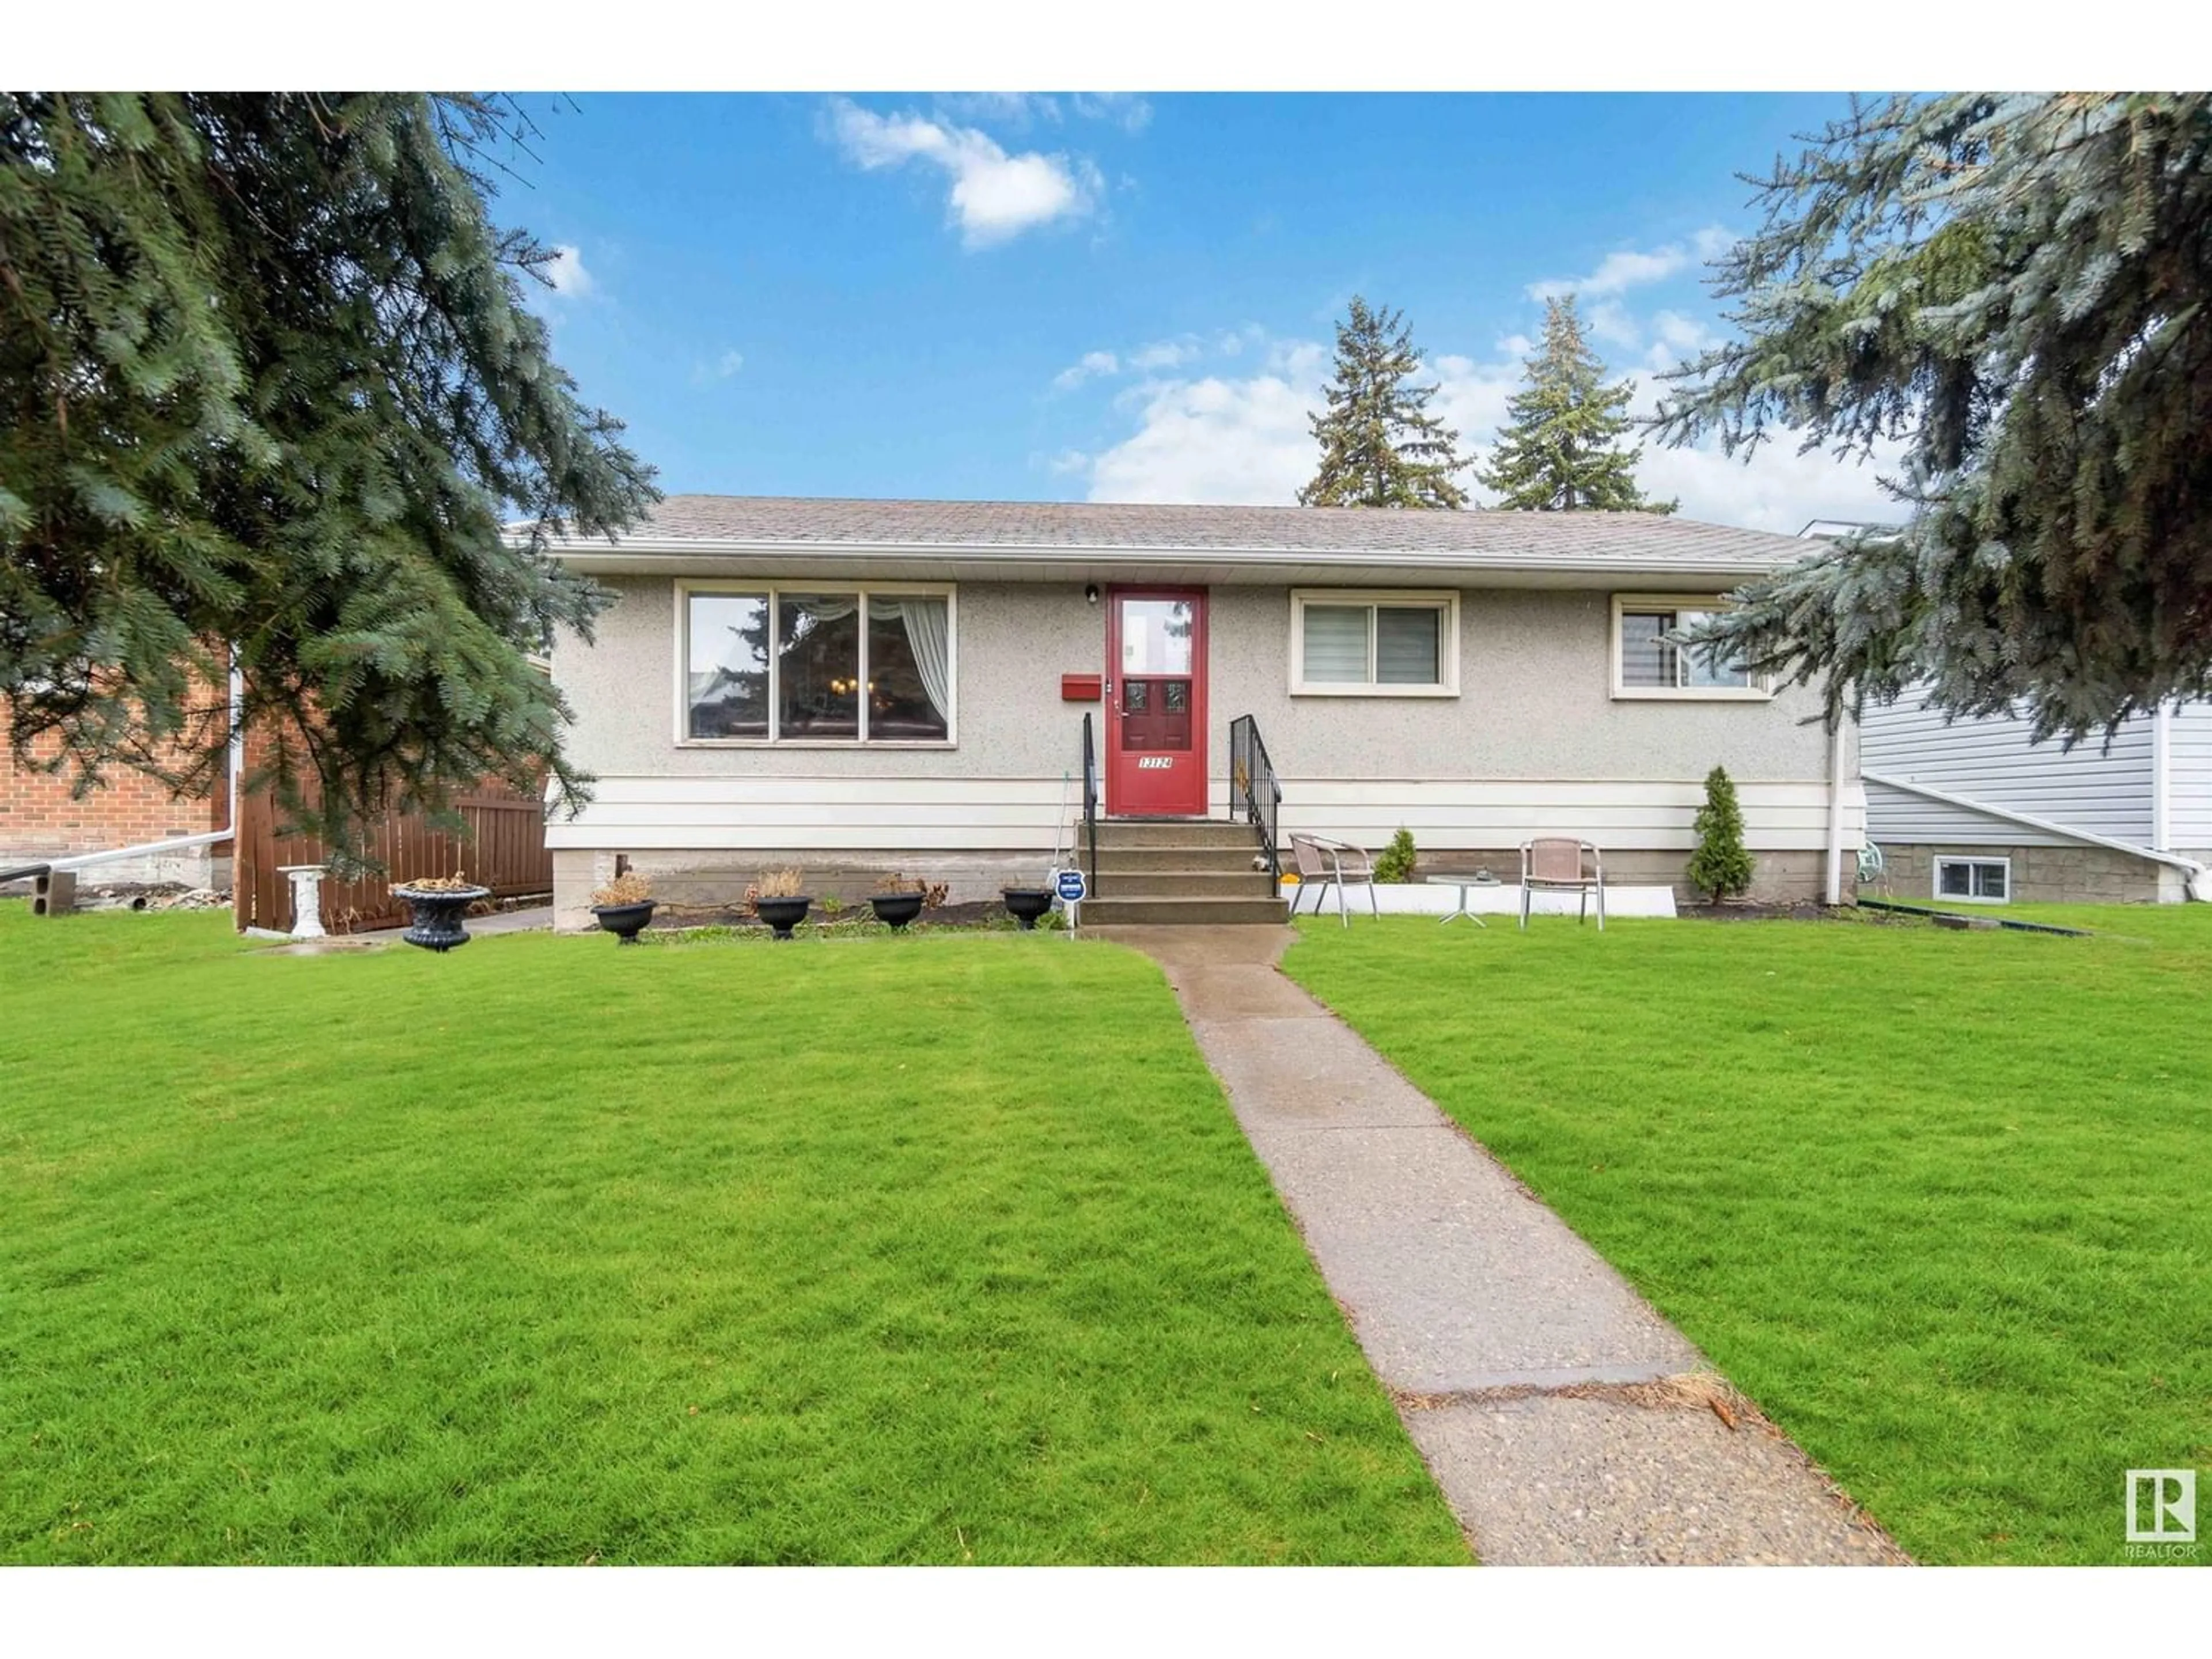 Frontside or backside of a home for 13124 83 ST NW, Edmonton Alberta T5E2W6